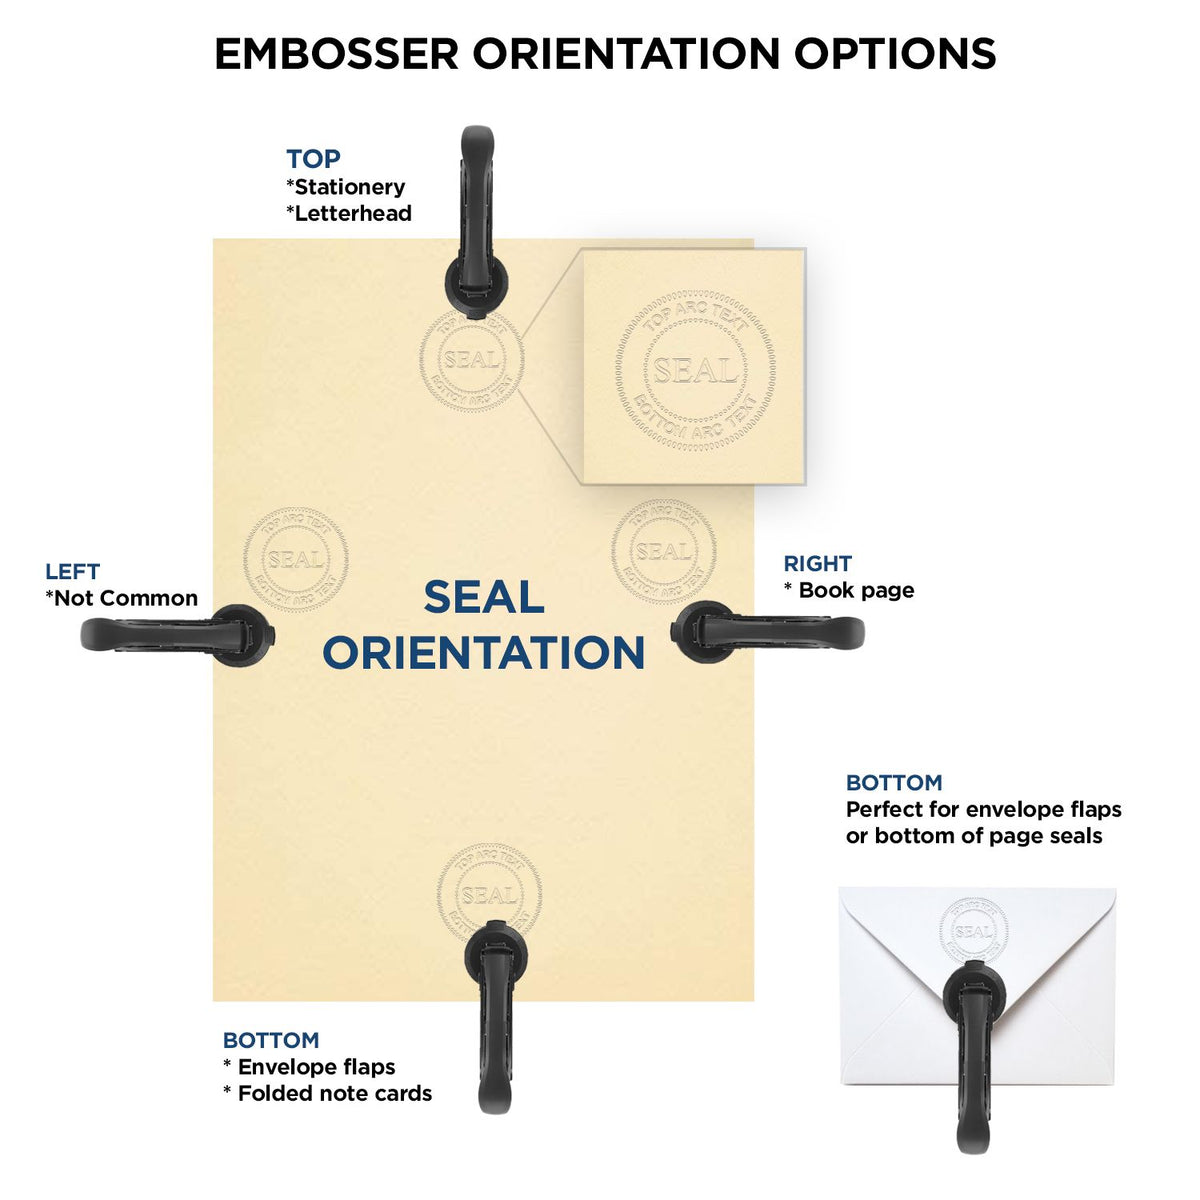 An infographic for the Handheld Texas Professional Engineer Embosser showing embosser orientation, this is showing examples of a top, bottom, right and left insert.